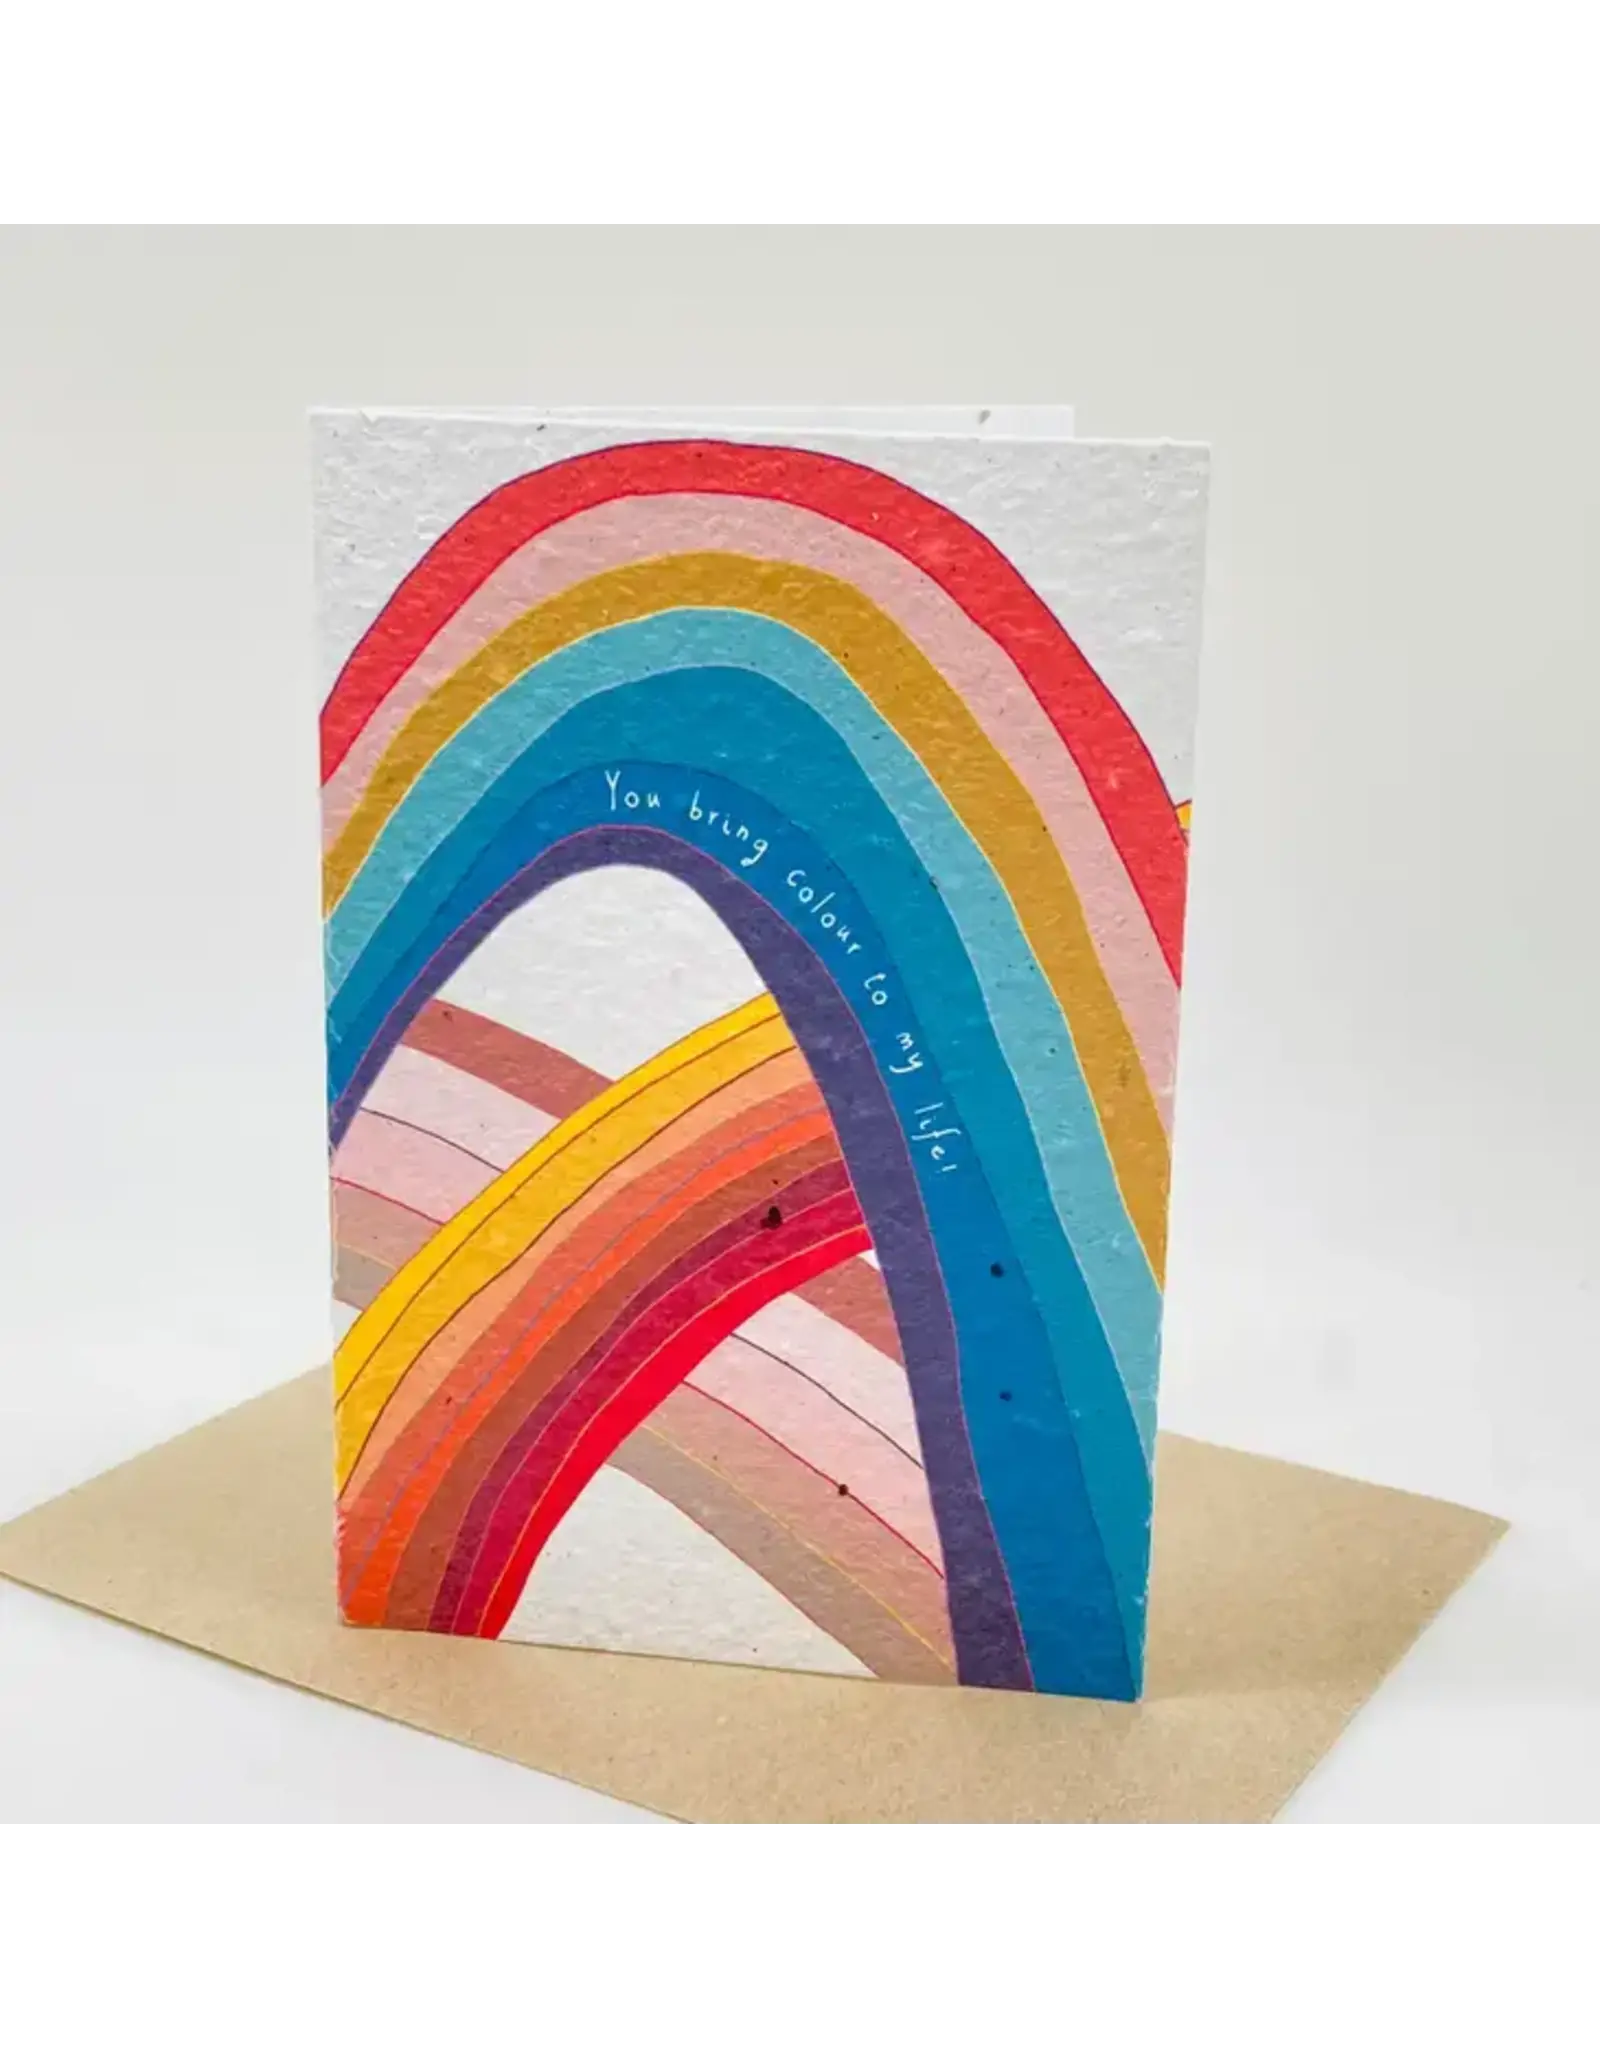 South Africa Rainbow - Growing Paper Card, South Africa